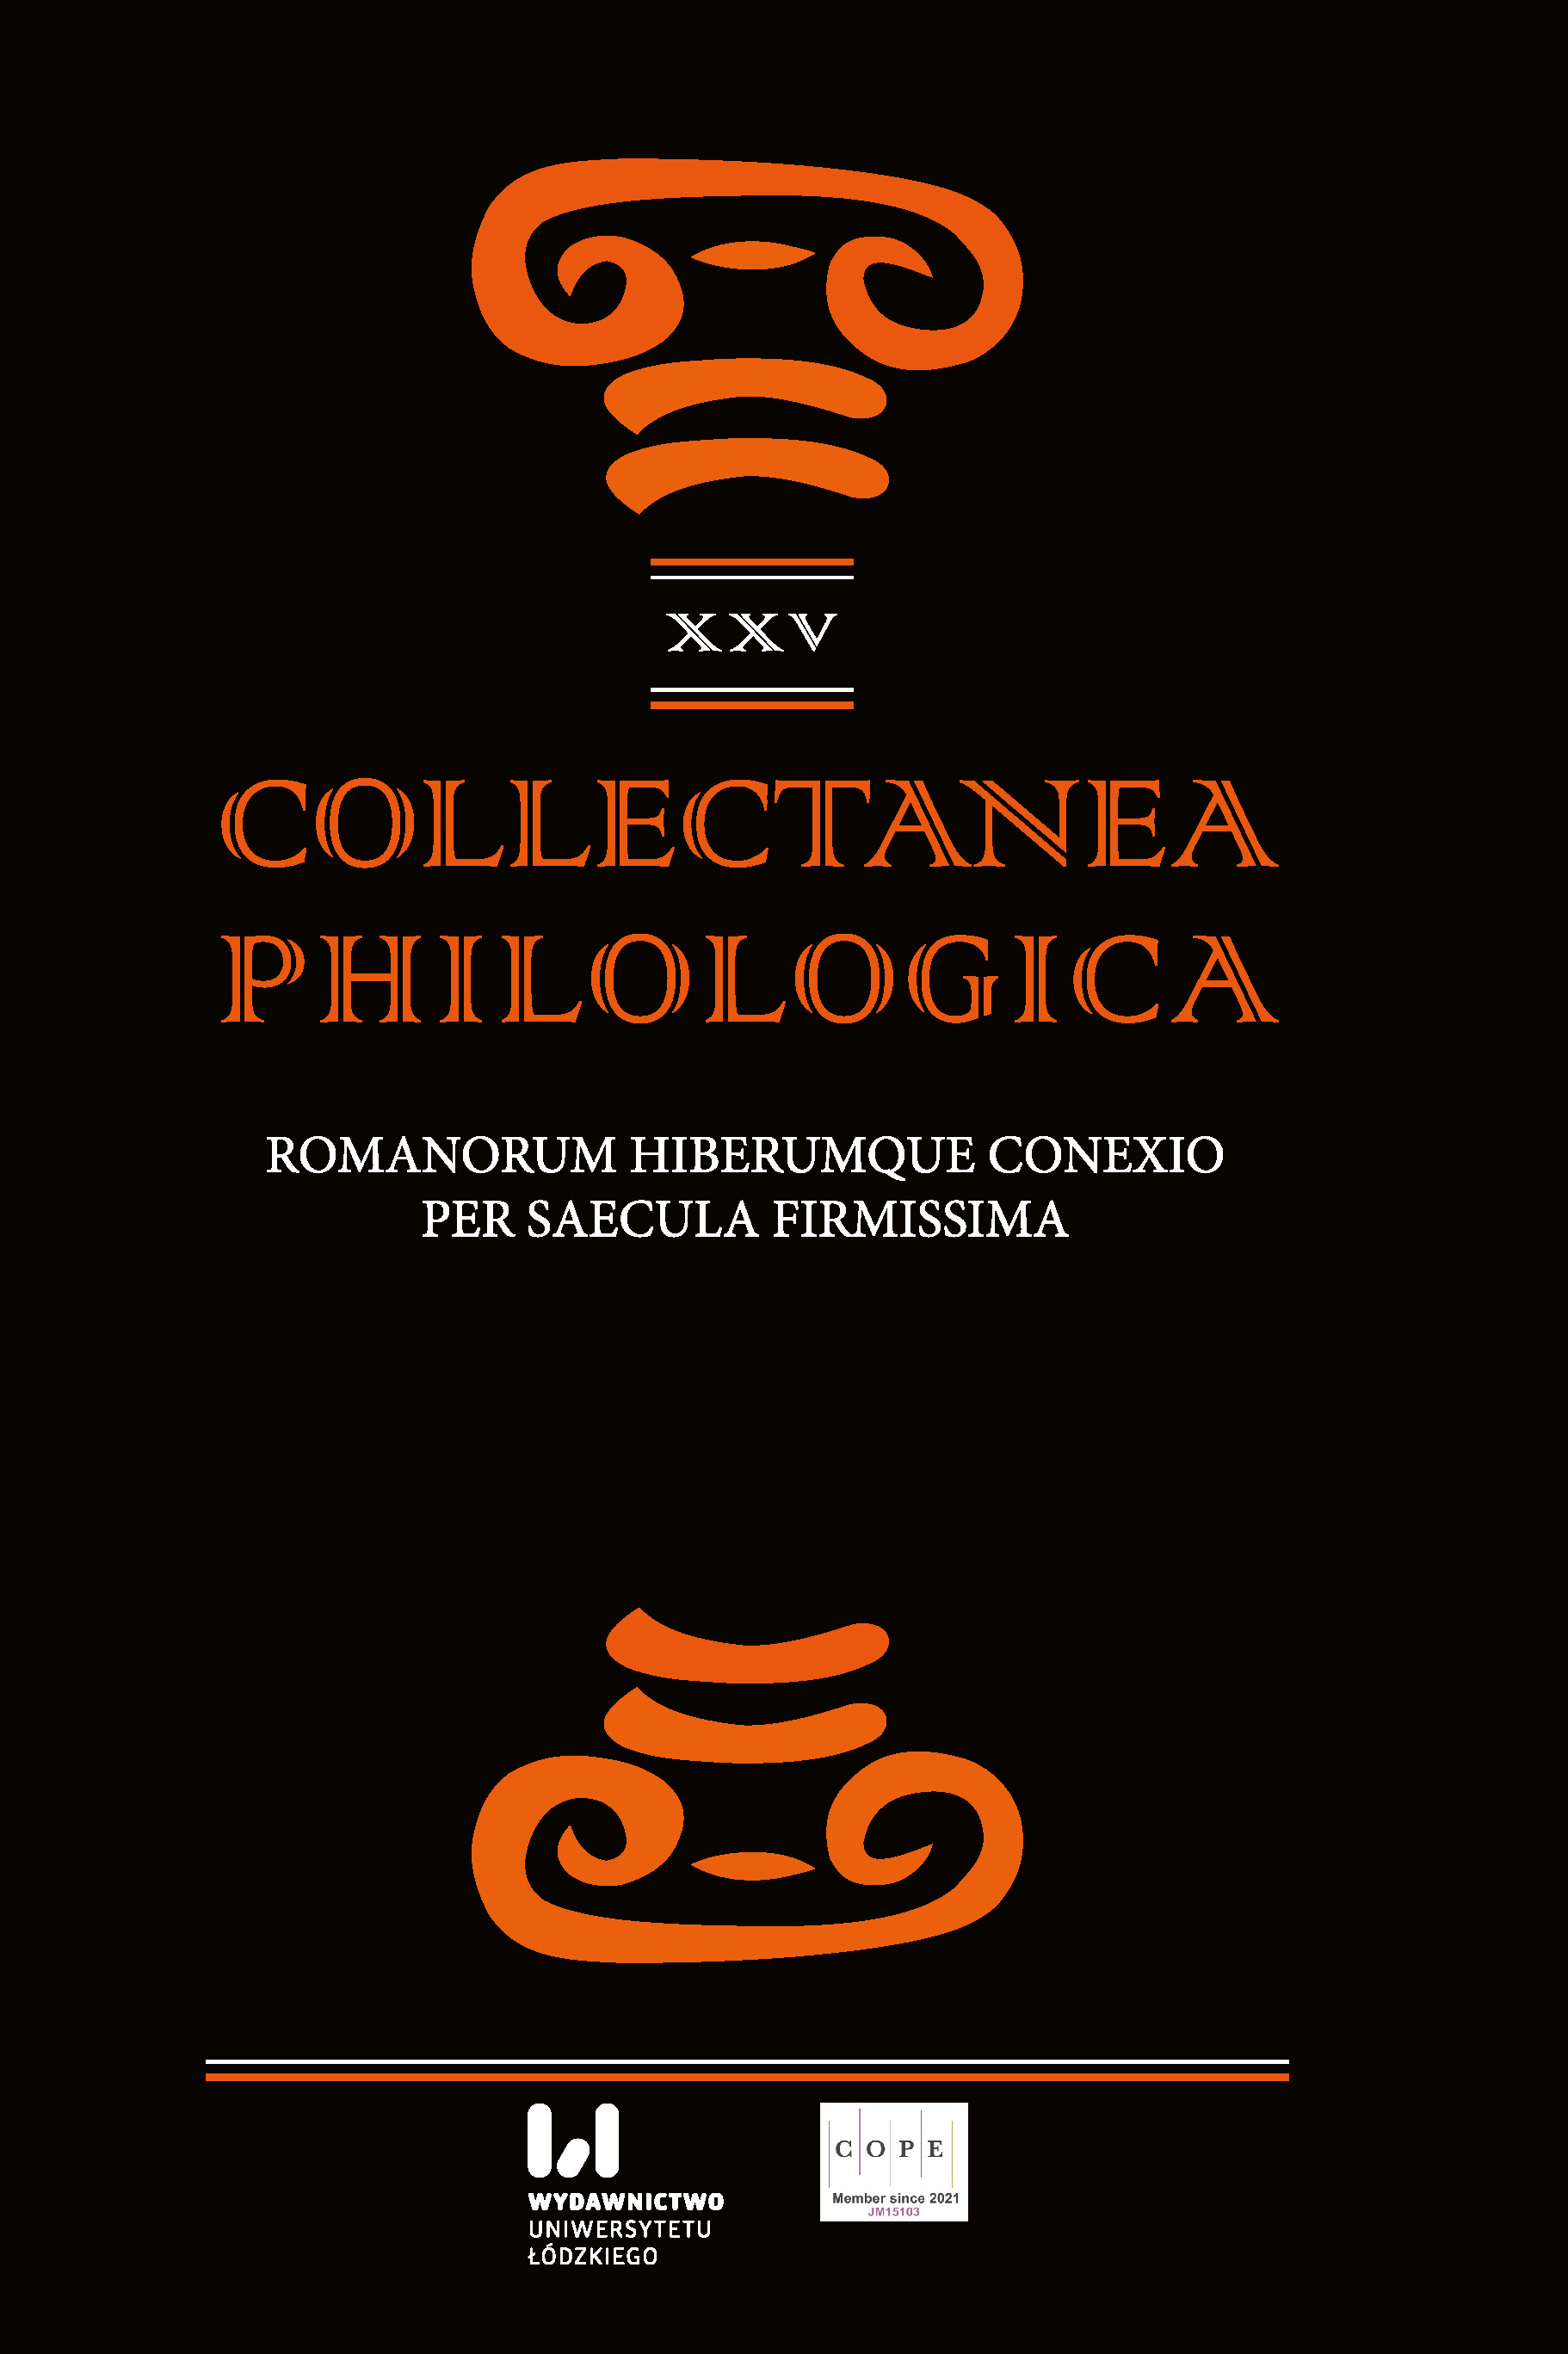 The Roman Conquest of Hispania Citerior. Strategies and Archaeological Evidence in the North-Eastern Peninsular Area. (II-I BCE): the Examples of Puig Castellar of Biosca and Can Tacó (Catalonia, Spain) Cover Image